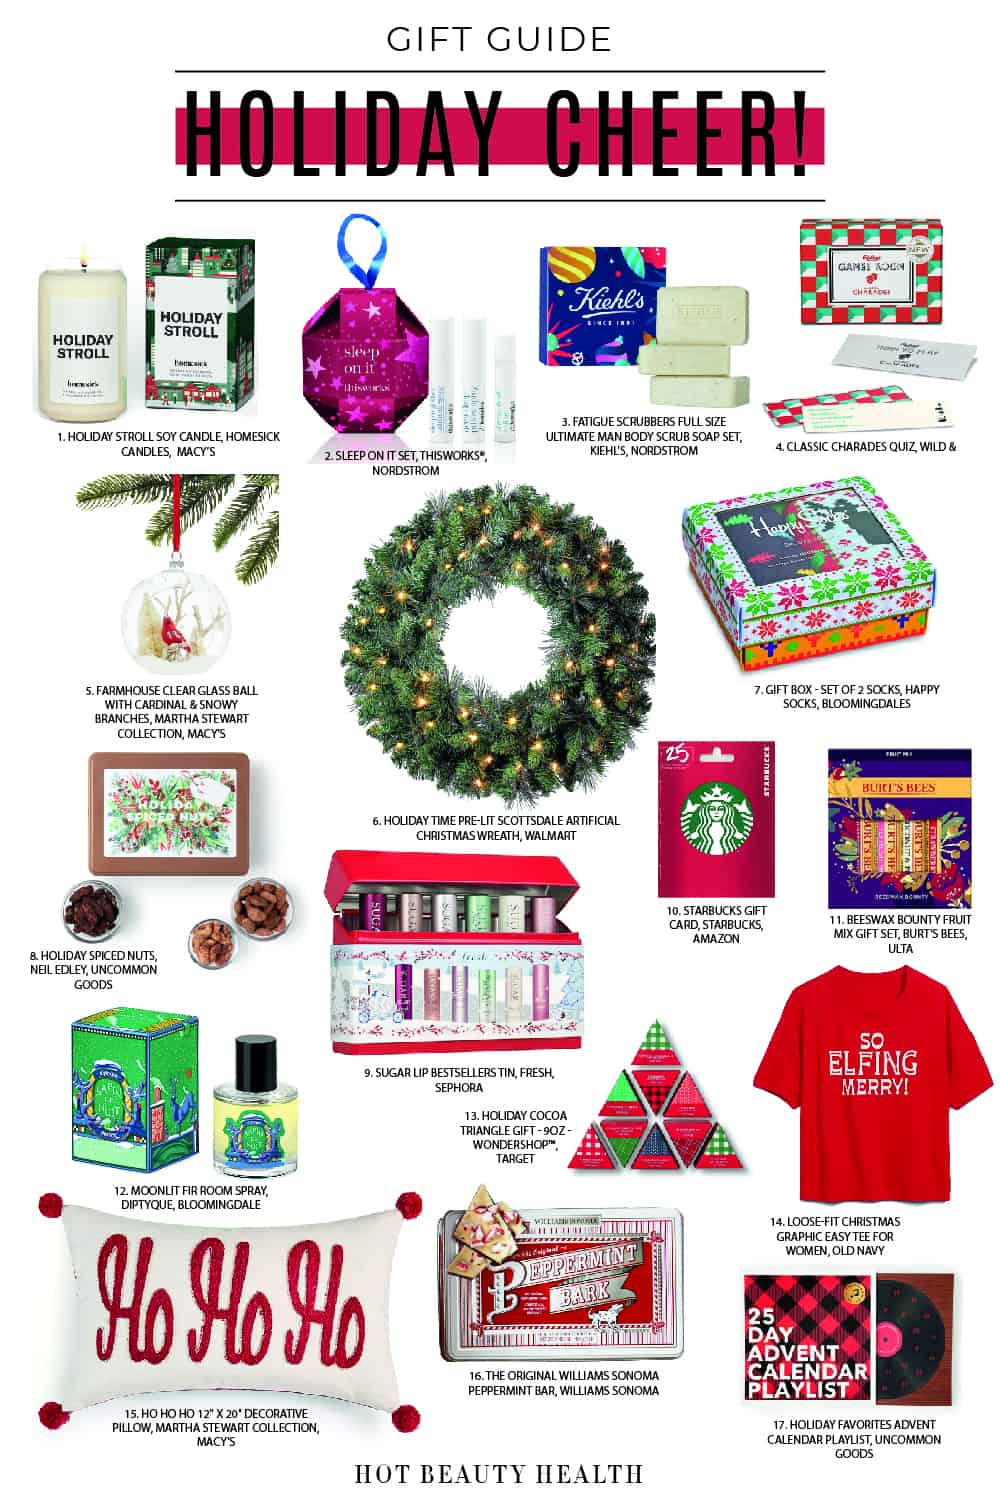 Gift Guide: Holiday Cheer!